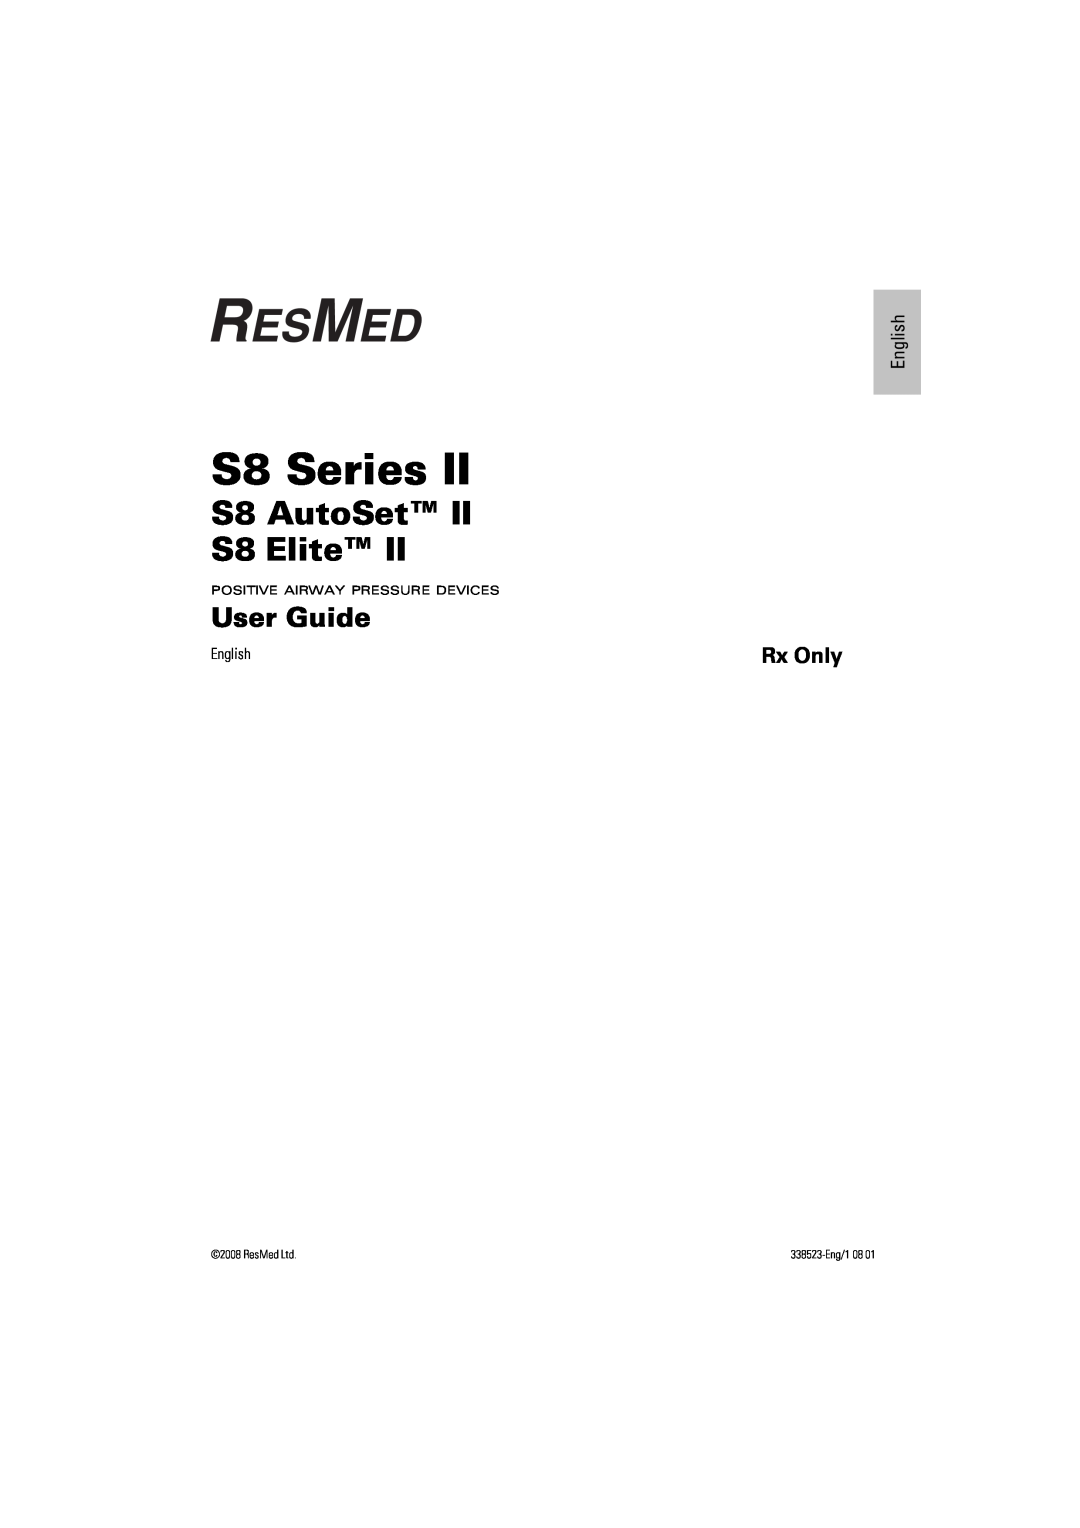 ResMed s8 manual English, S8 Series, S8 AutoSet S8 Elite, User Guide, Rx Only, 338523-Eng/108 